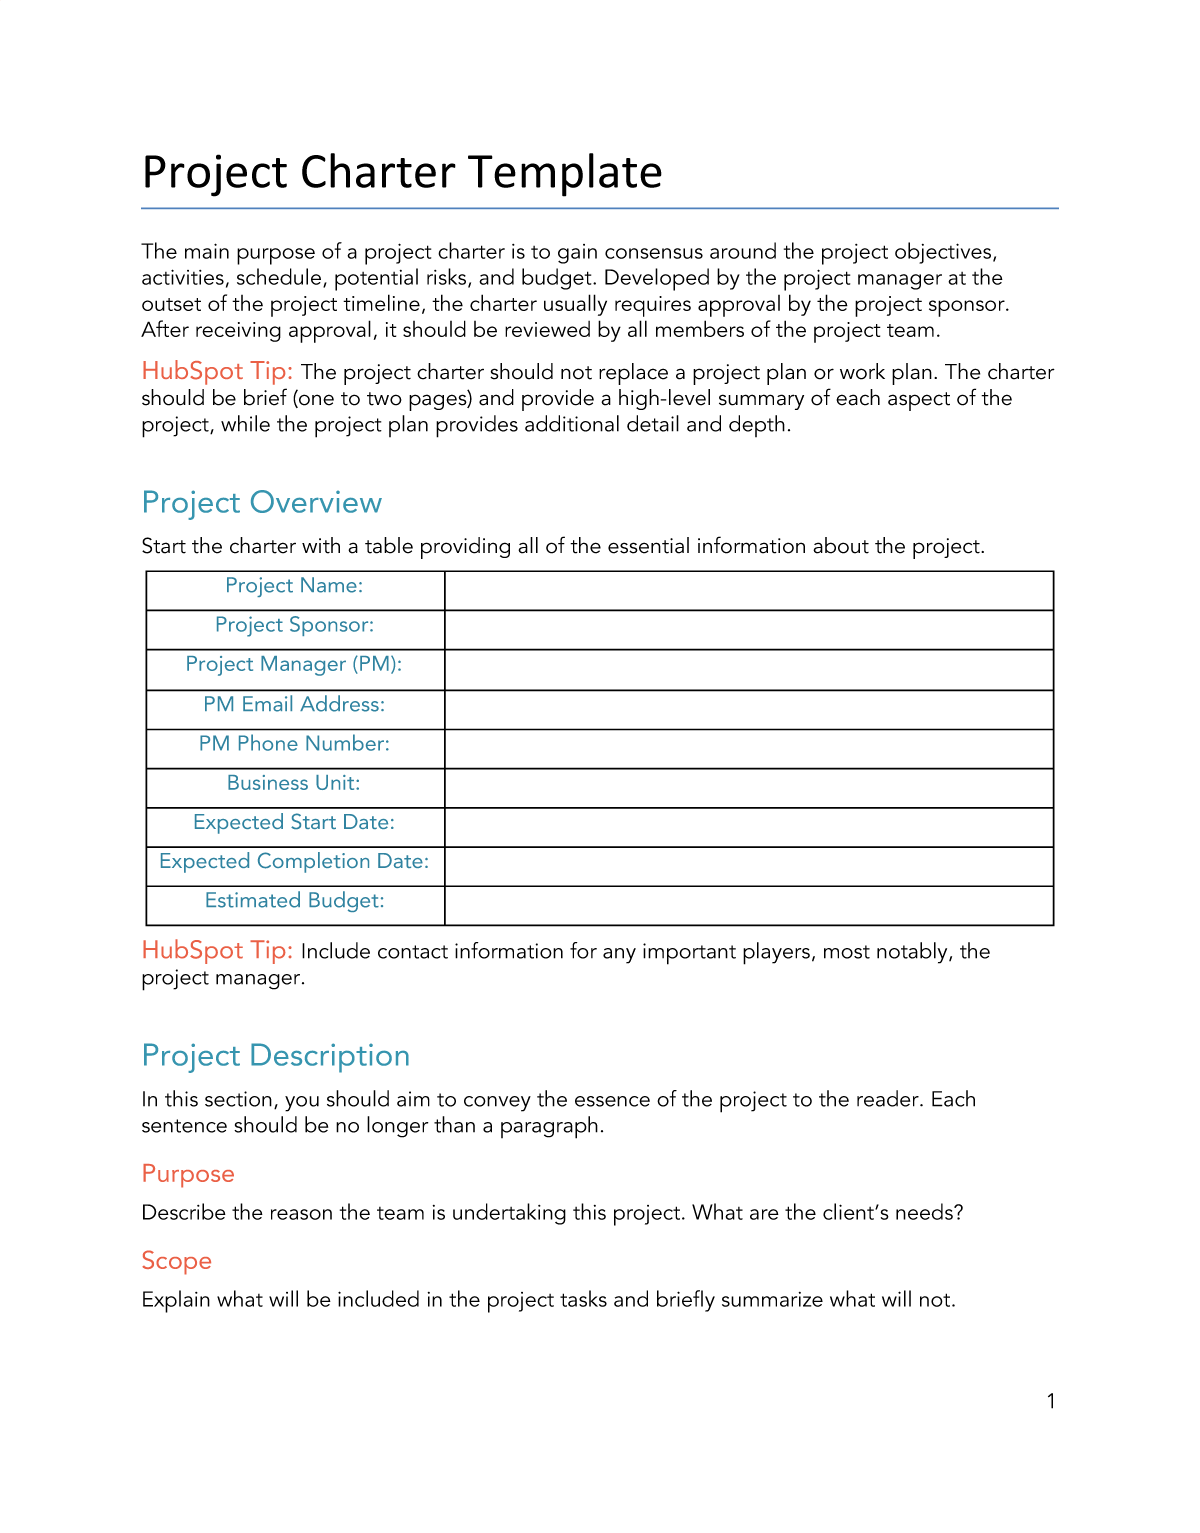 HubSpot's free project charter template